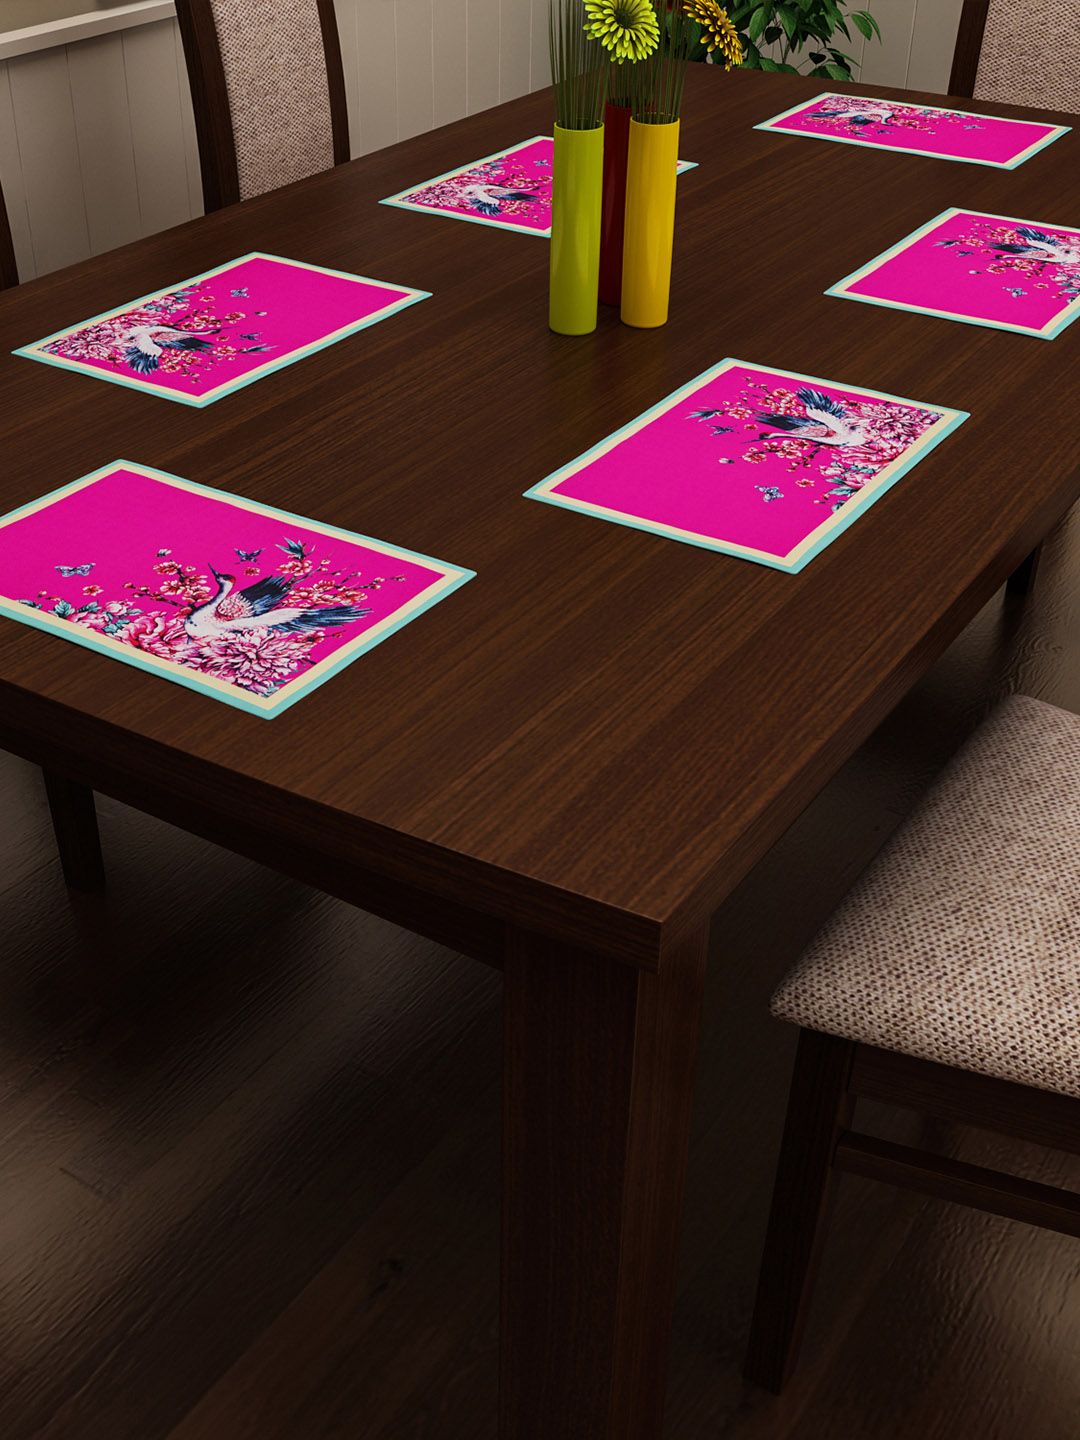 SEJ by Nisha Gupta Set of 6 Printed Table Placemats Price in India